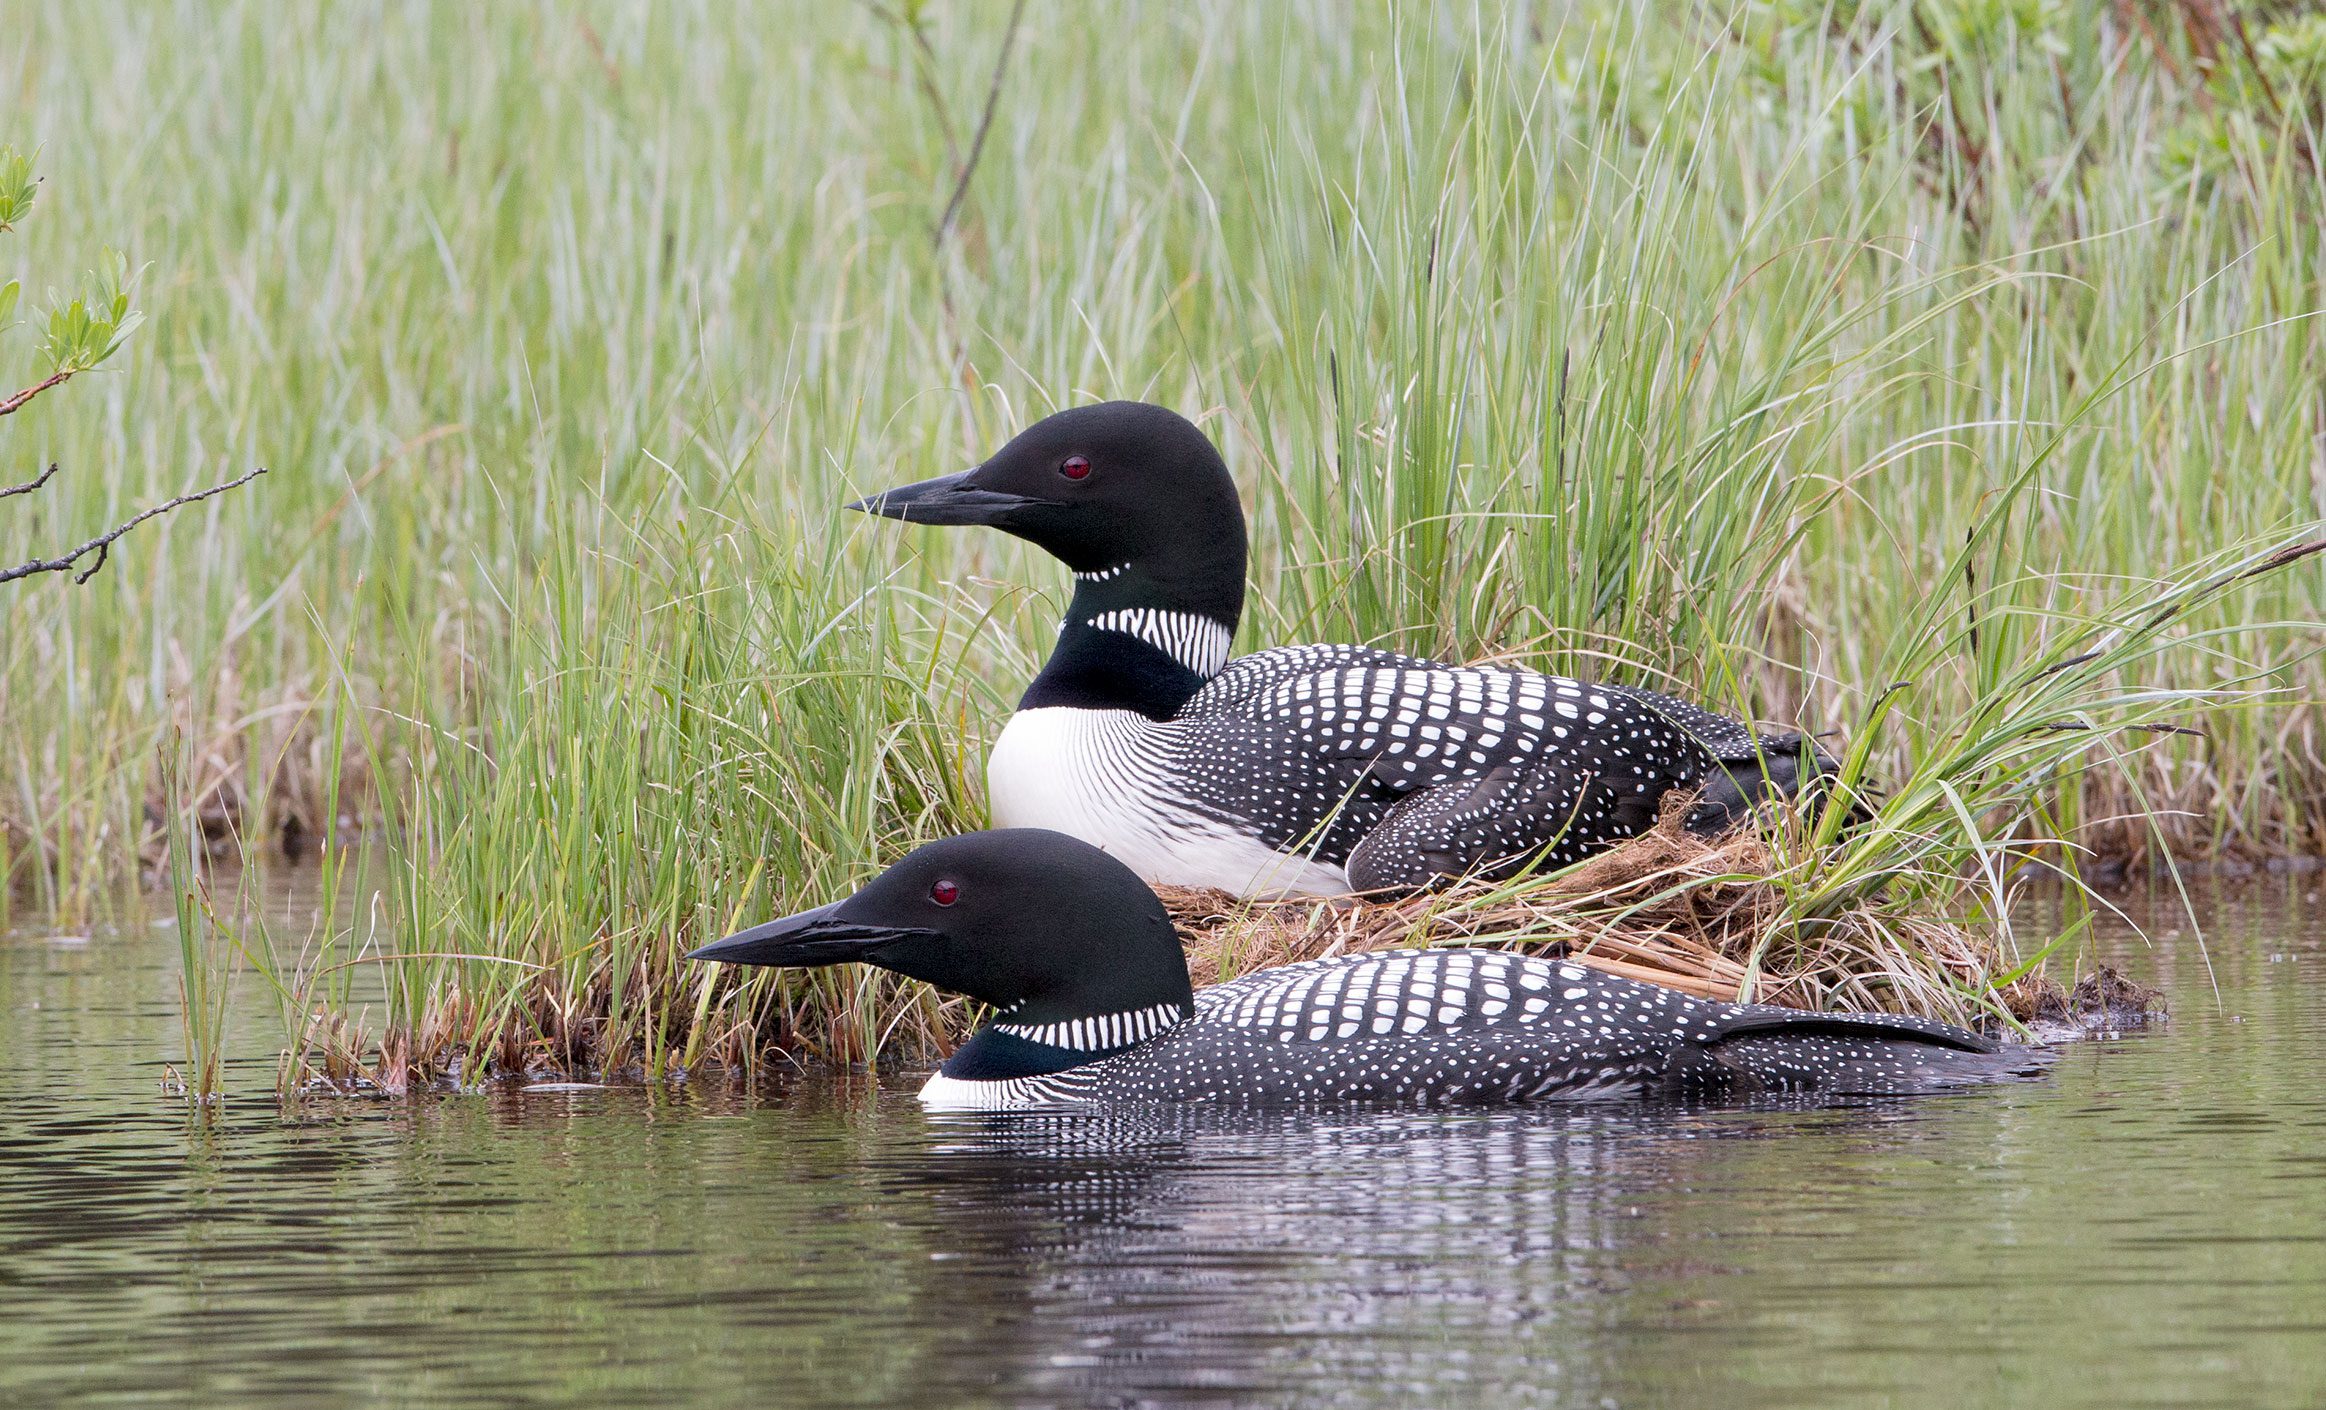 Common Loons nest in quiet, protected, hidden spots of lakeshore, typically in the lee of islands or in a sheltered bay. The male selects the nest site. Male and female build the nest together and take turns incubating eggs. Photo by Roberta Olenick.